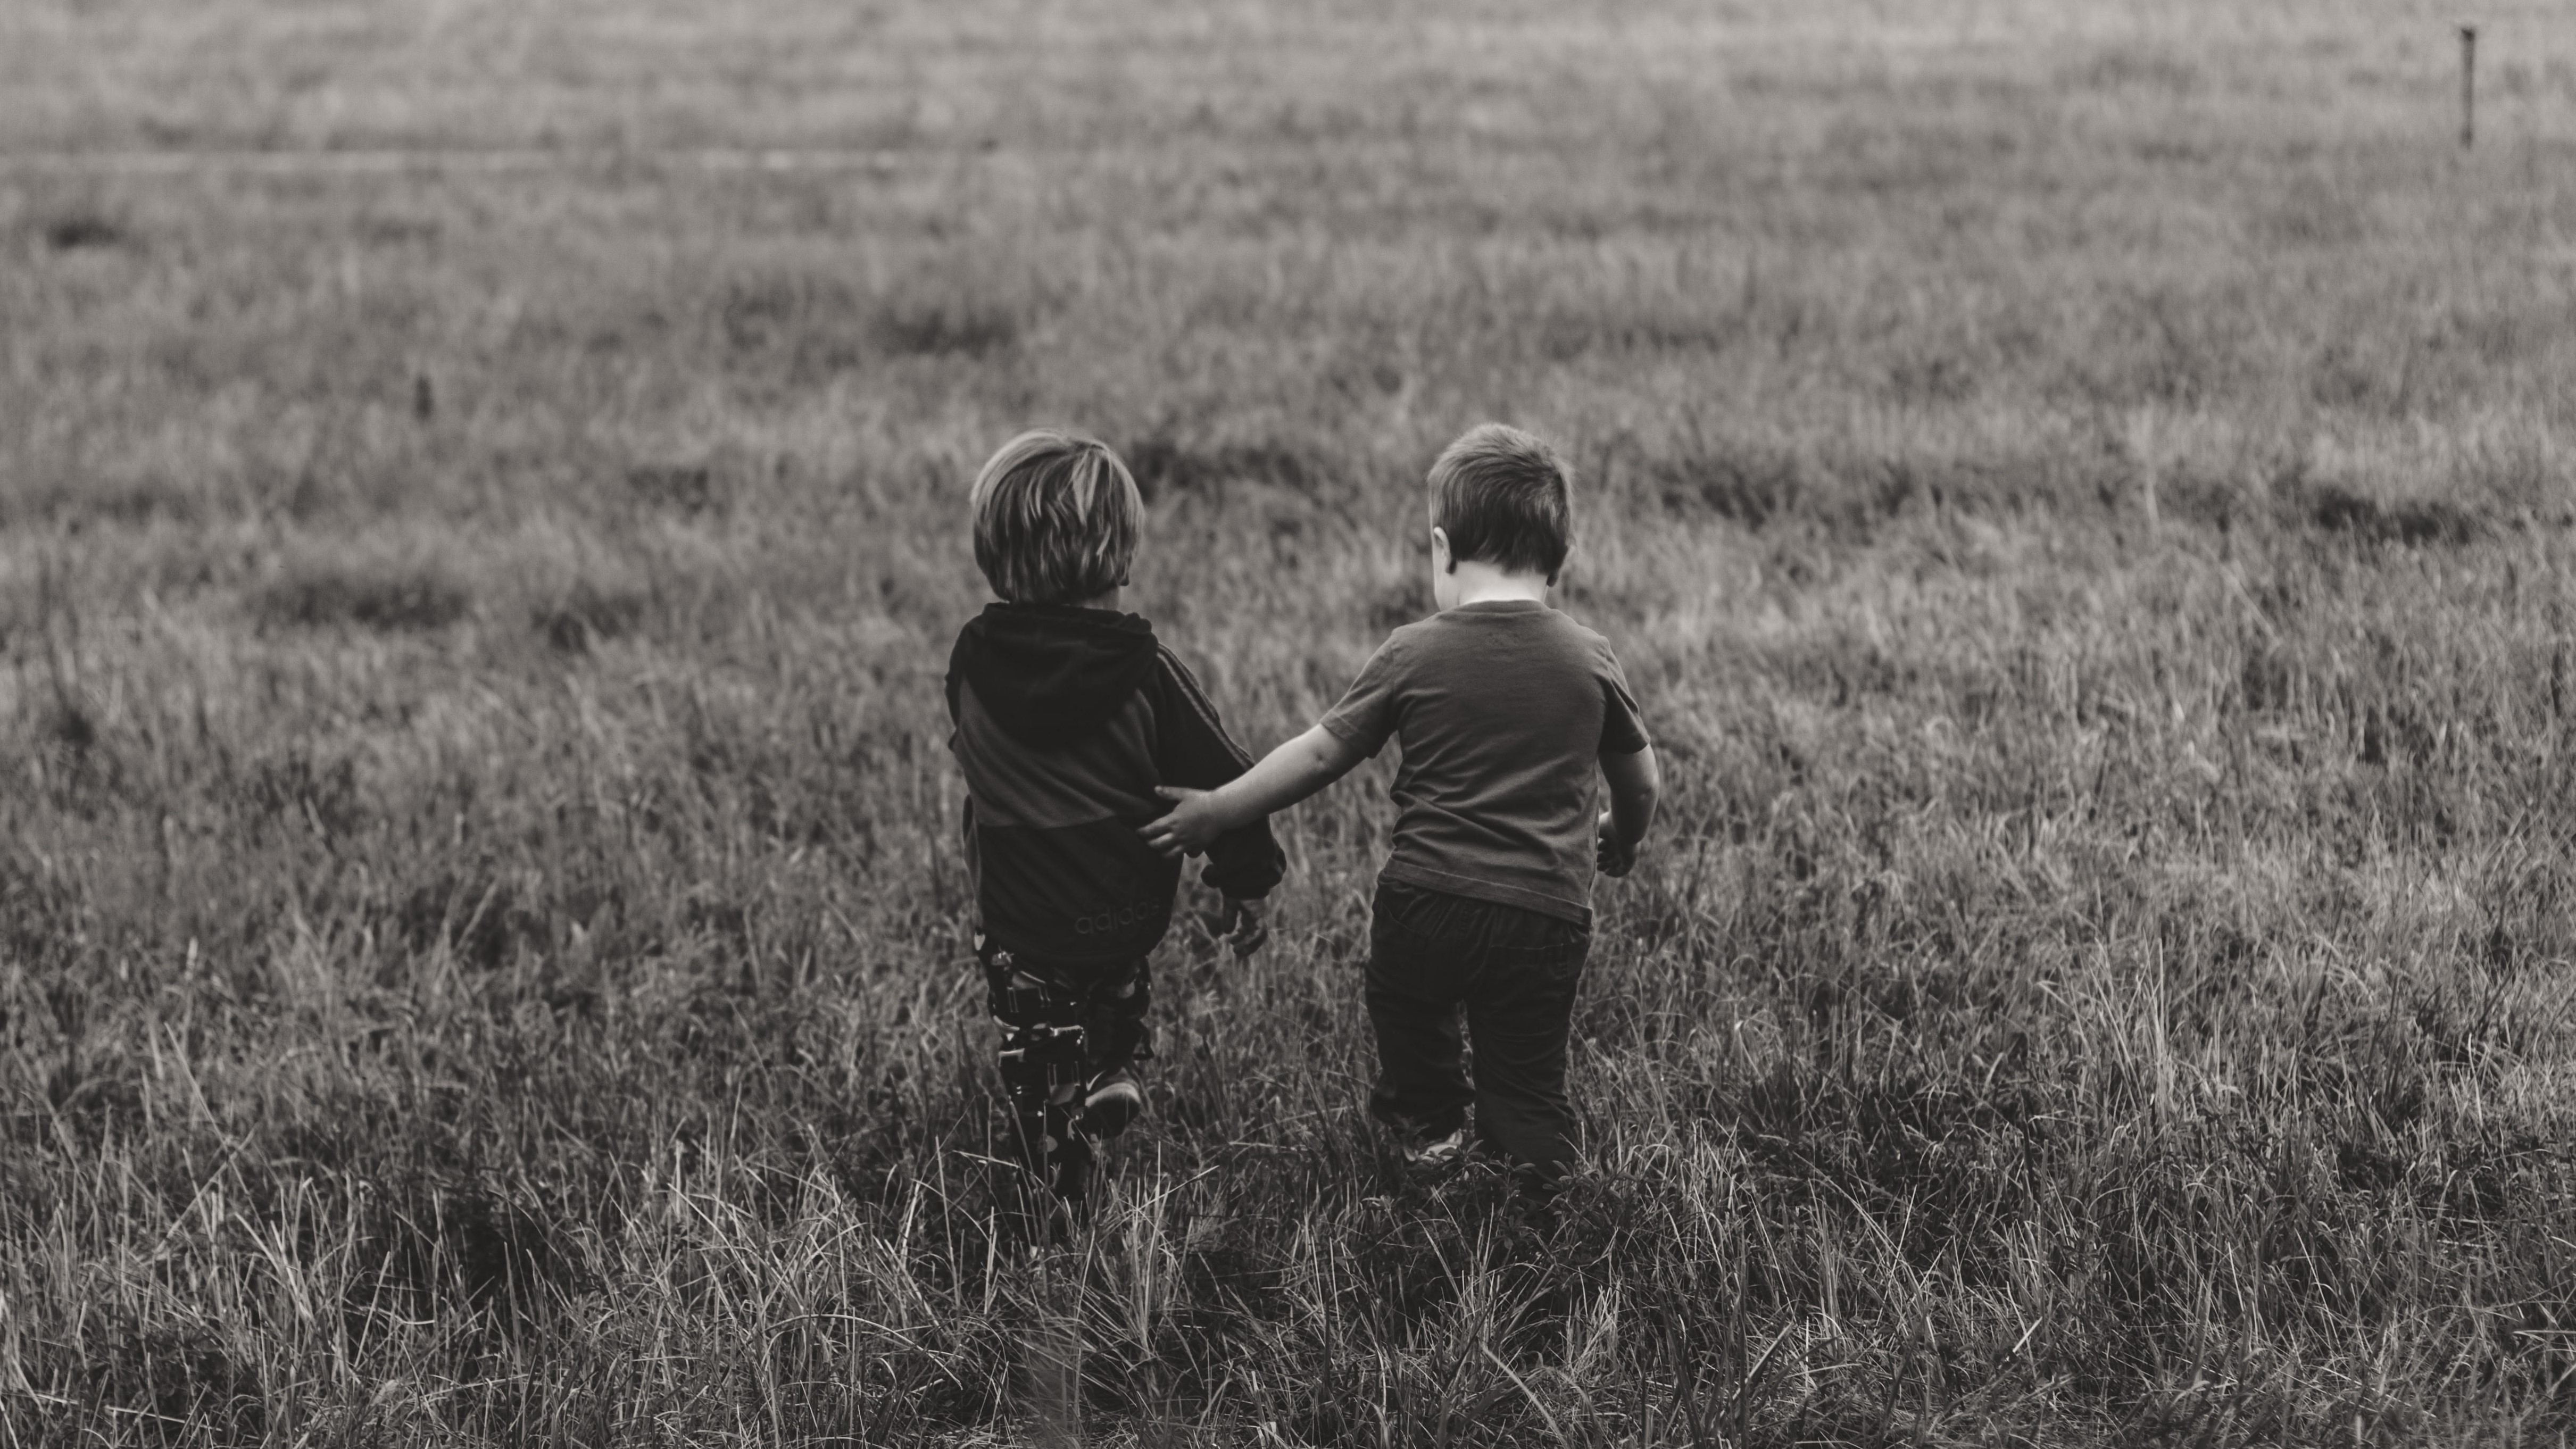 Two boys walking together in a field.